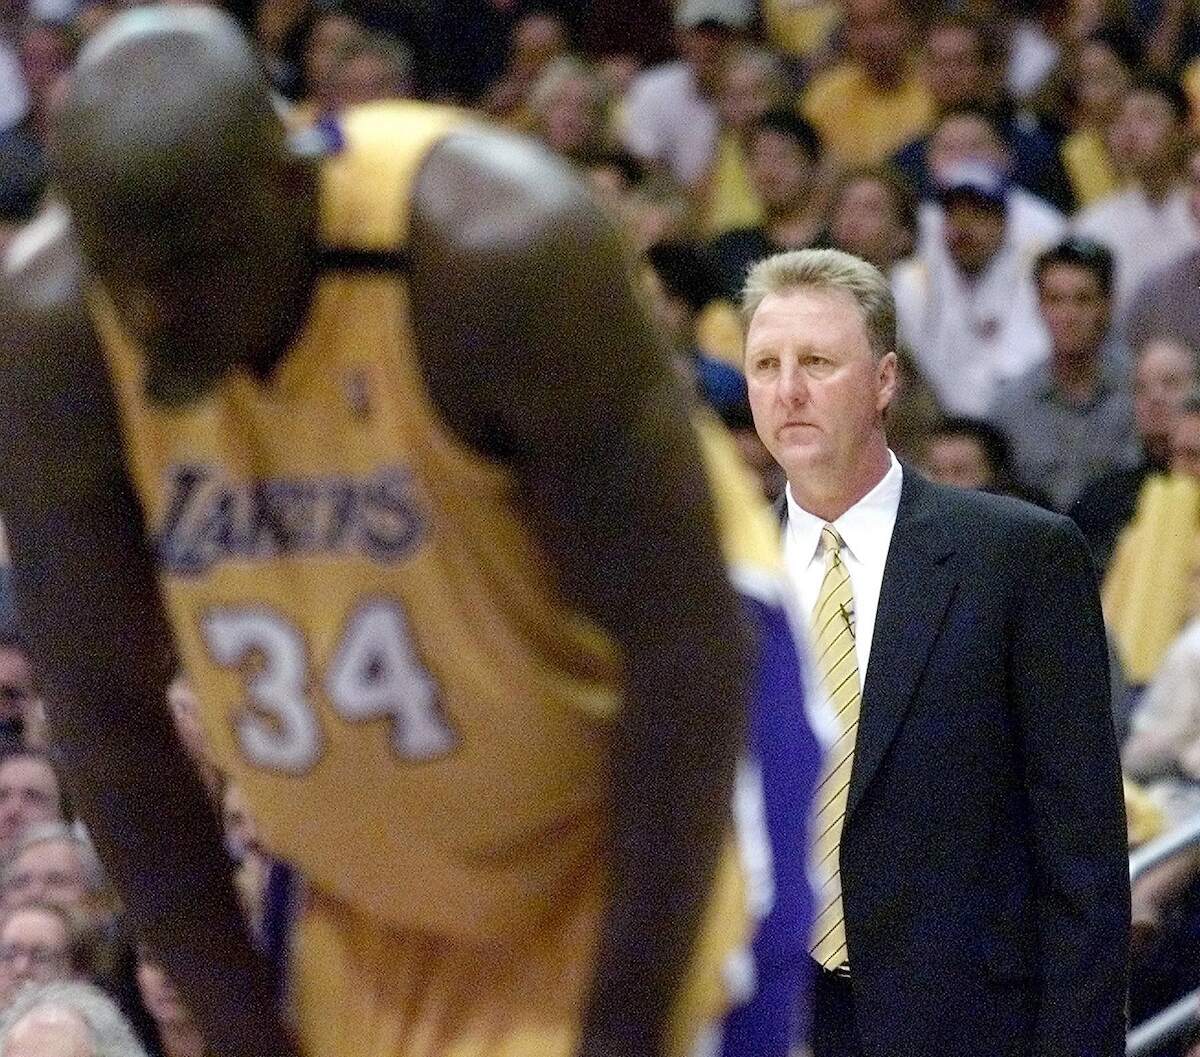 Head coach Larry Bird of the Indiana Pacers looks out at the court and Shaquille O'Neal of the Los Angeles Lakers who's bent over recovering